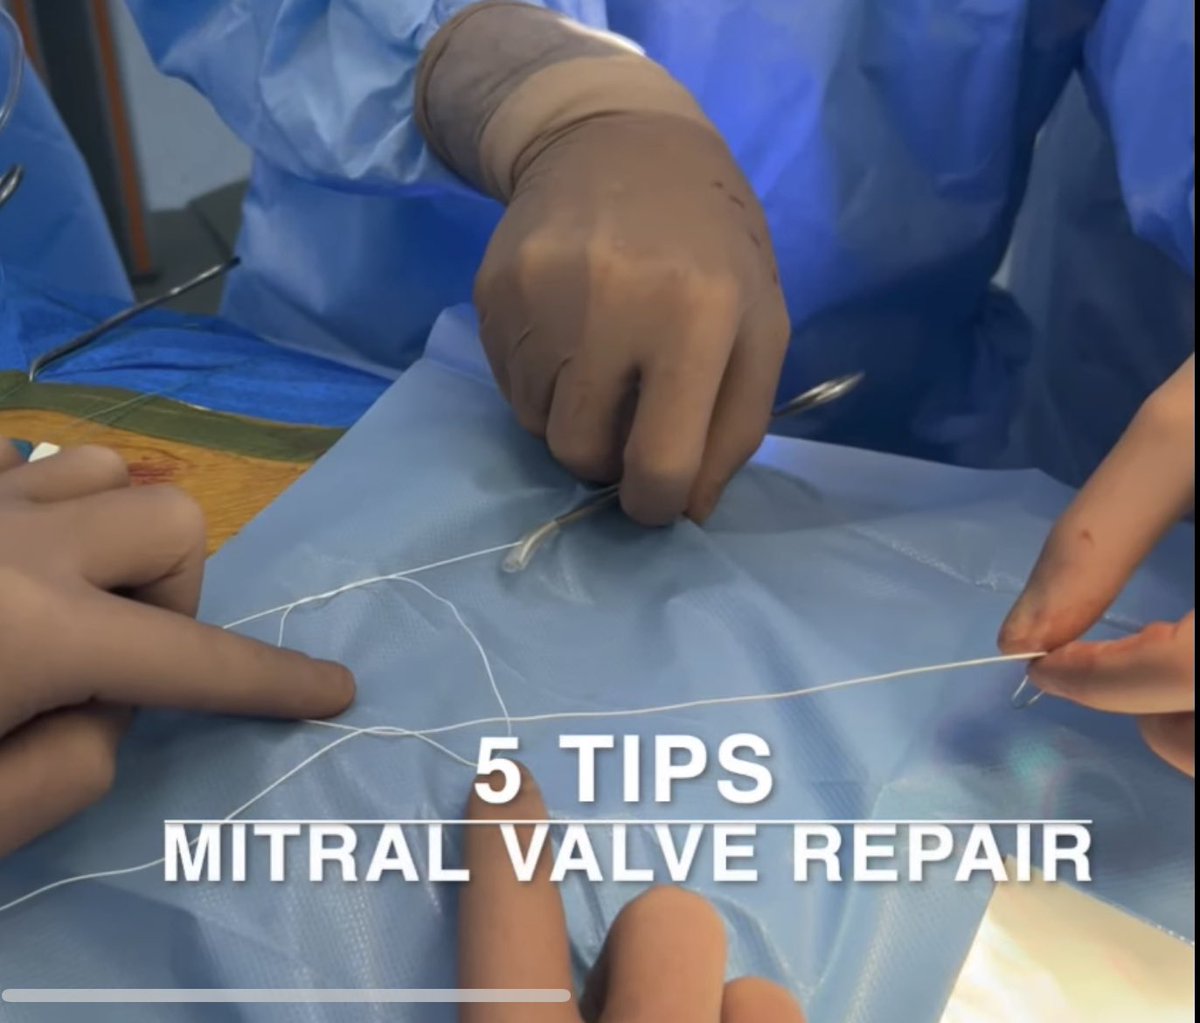 Check out these tips for #MitralValveRepair:
1️⃣ Keep the heart closer;
2️⃣ Pupillary muscles exposure;
3️⃣ Safadi knot;
4️⃣ Test the valve🩸;
5️⃣ Hide the knots.

For full information and mind-blowing visuals, check out 👉 youtu.be/IXhVN1zbyVw.
Prepare to be amazed! #SurgicalTips